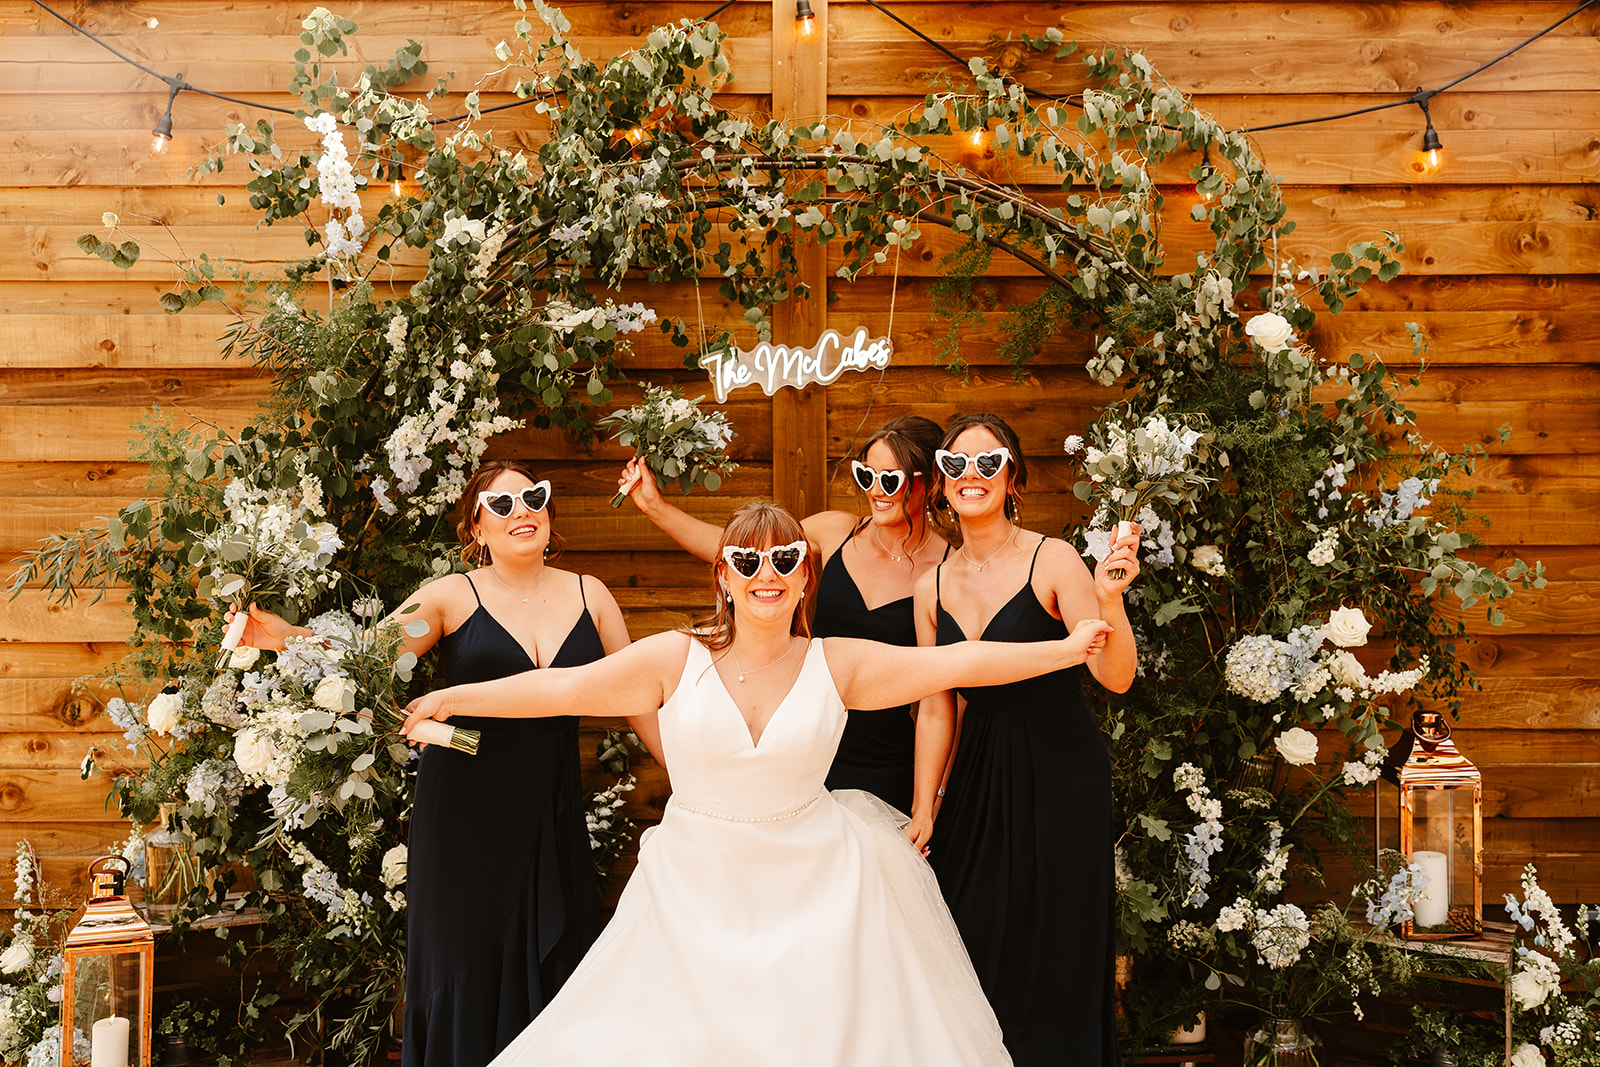 bridal party poses with heart shaped sunglasses on with custom neon sign in the background at Elrick house wedding venue